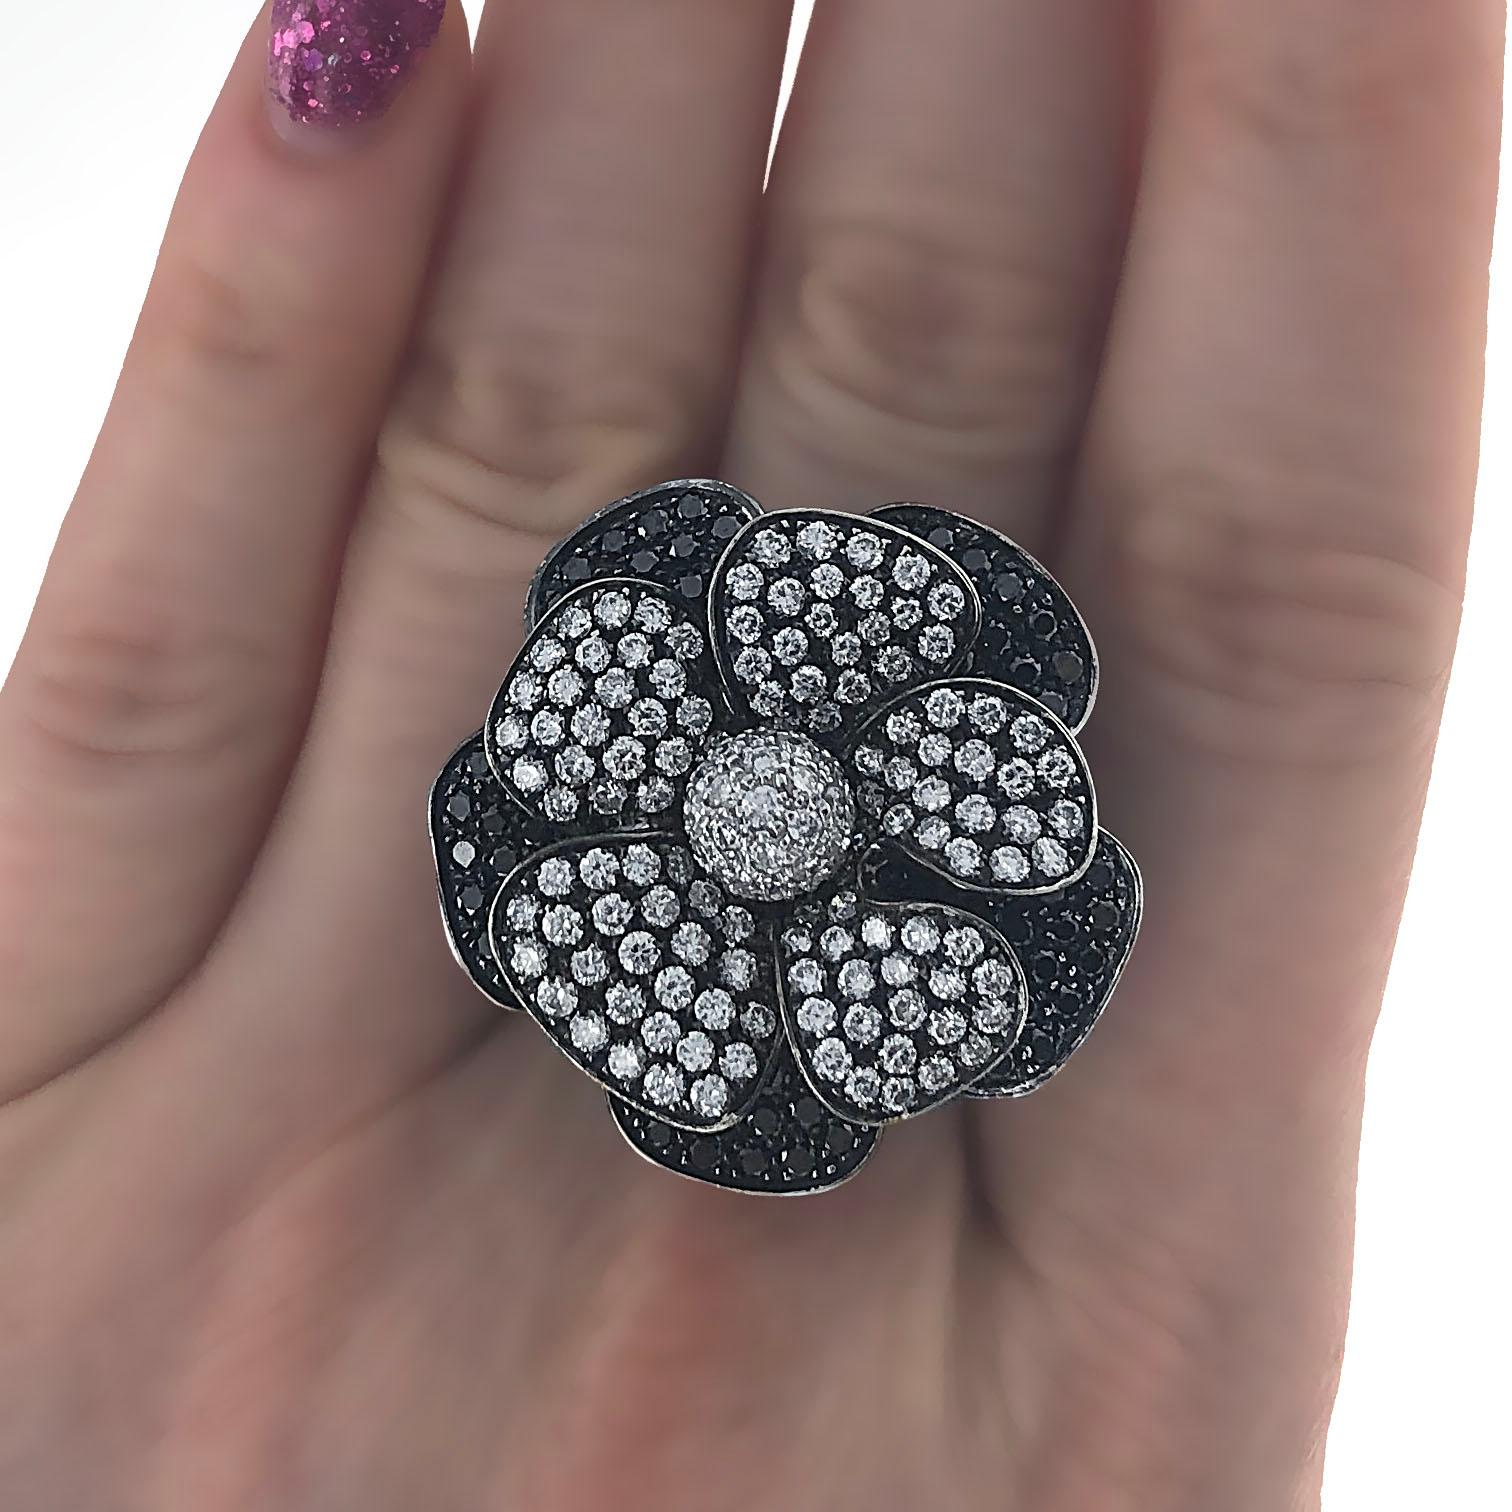 18 karat white gold black diamond and white diamond flower cocktail ring. The ring is made with white round brilliant diamonds and black round brilliant diamonds. The ring is made to look like flower petals.